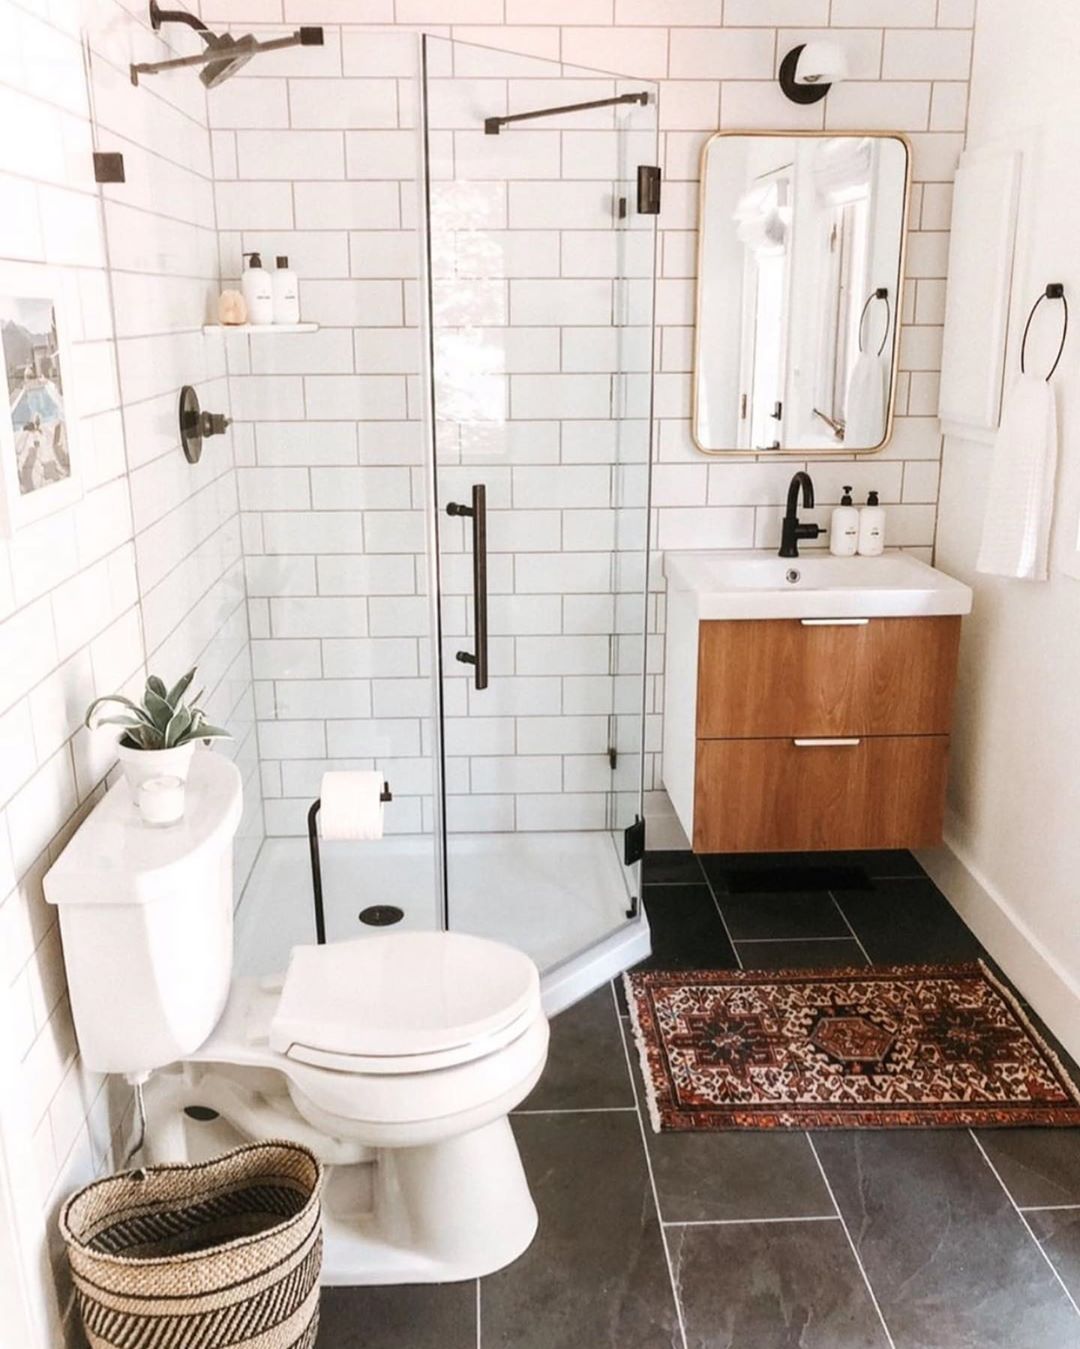 Small bathroom with white wall tile and dark floors with glass shower. Photo by Instagram user @kyrosdesigns